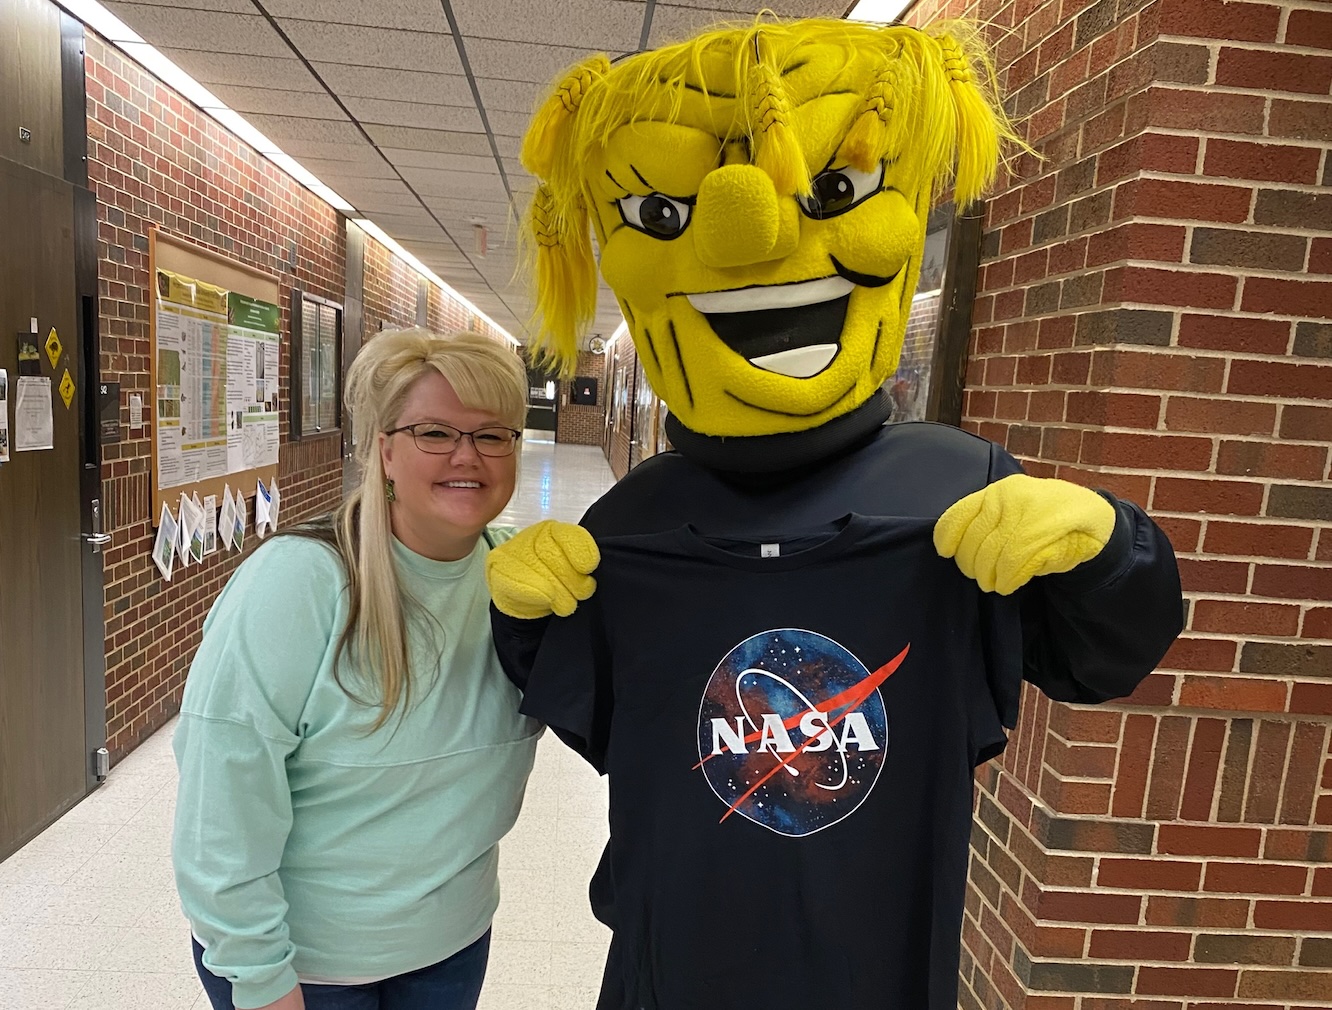 Photograph of seminar speaker with Wushock, who is holding a NASA shirt over his chest